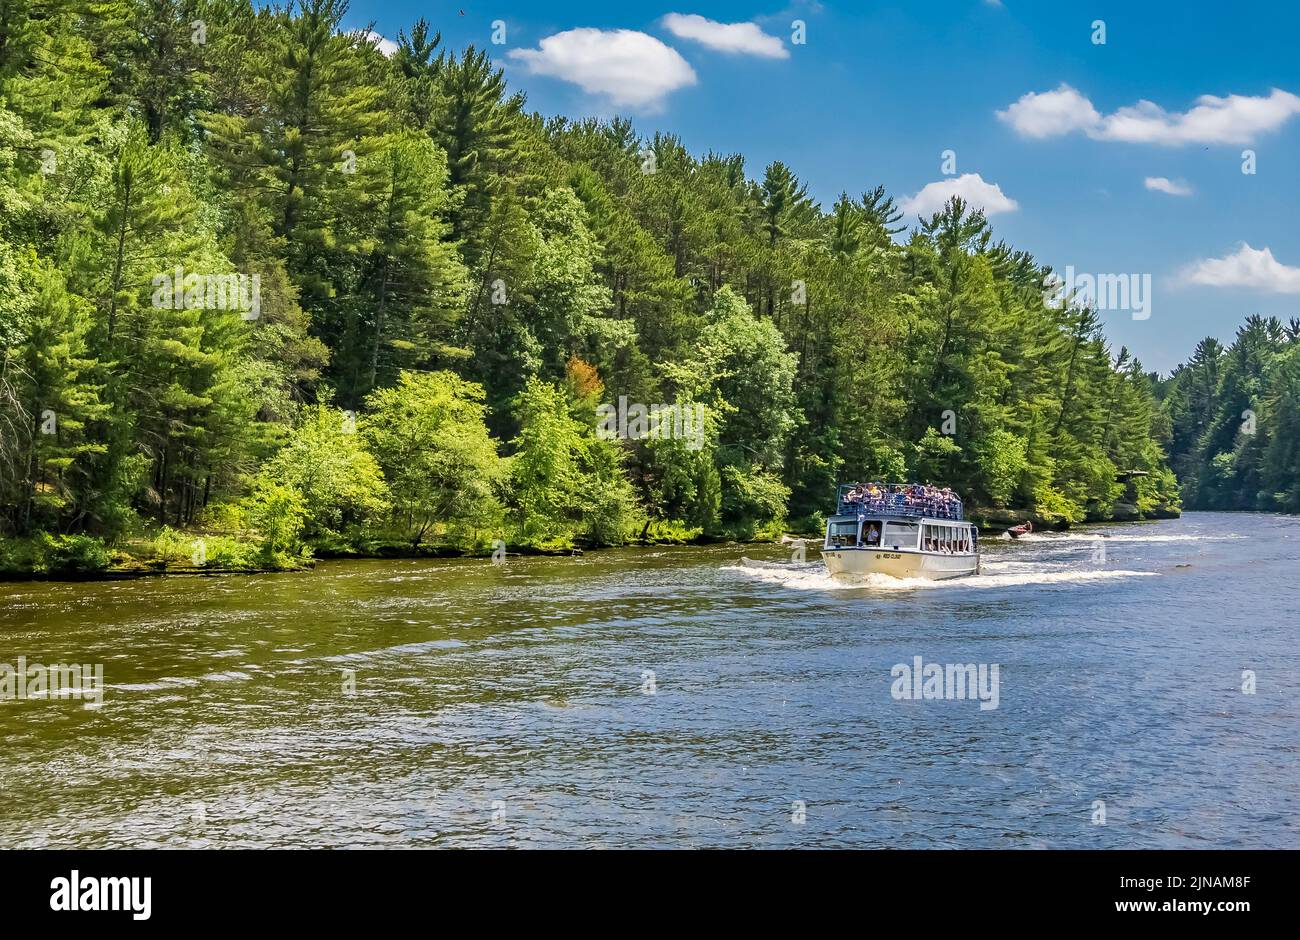 Sightseeing tour boat in the Wisconsin River in the Wisconsin Dells in Wisconsin USA Stock Photo